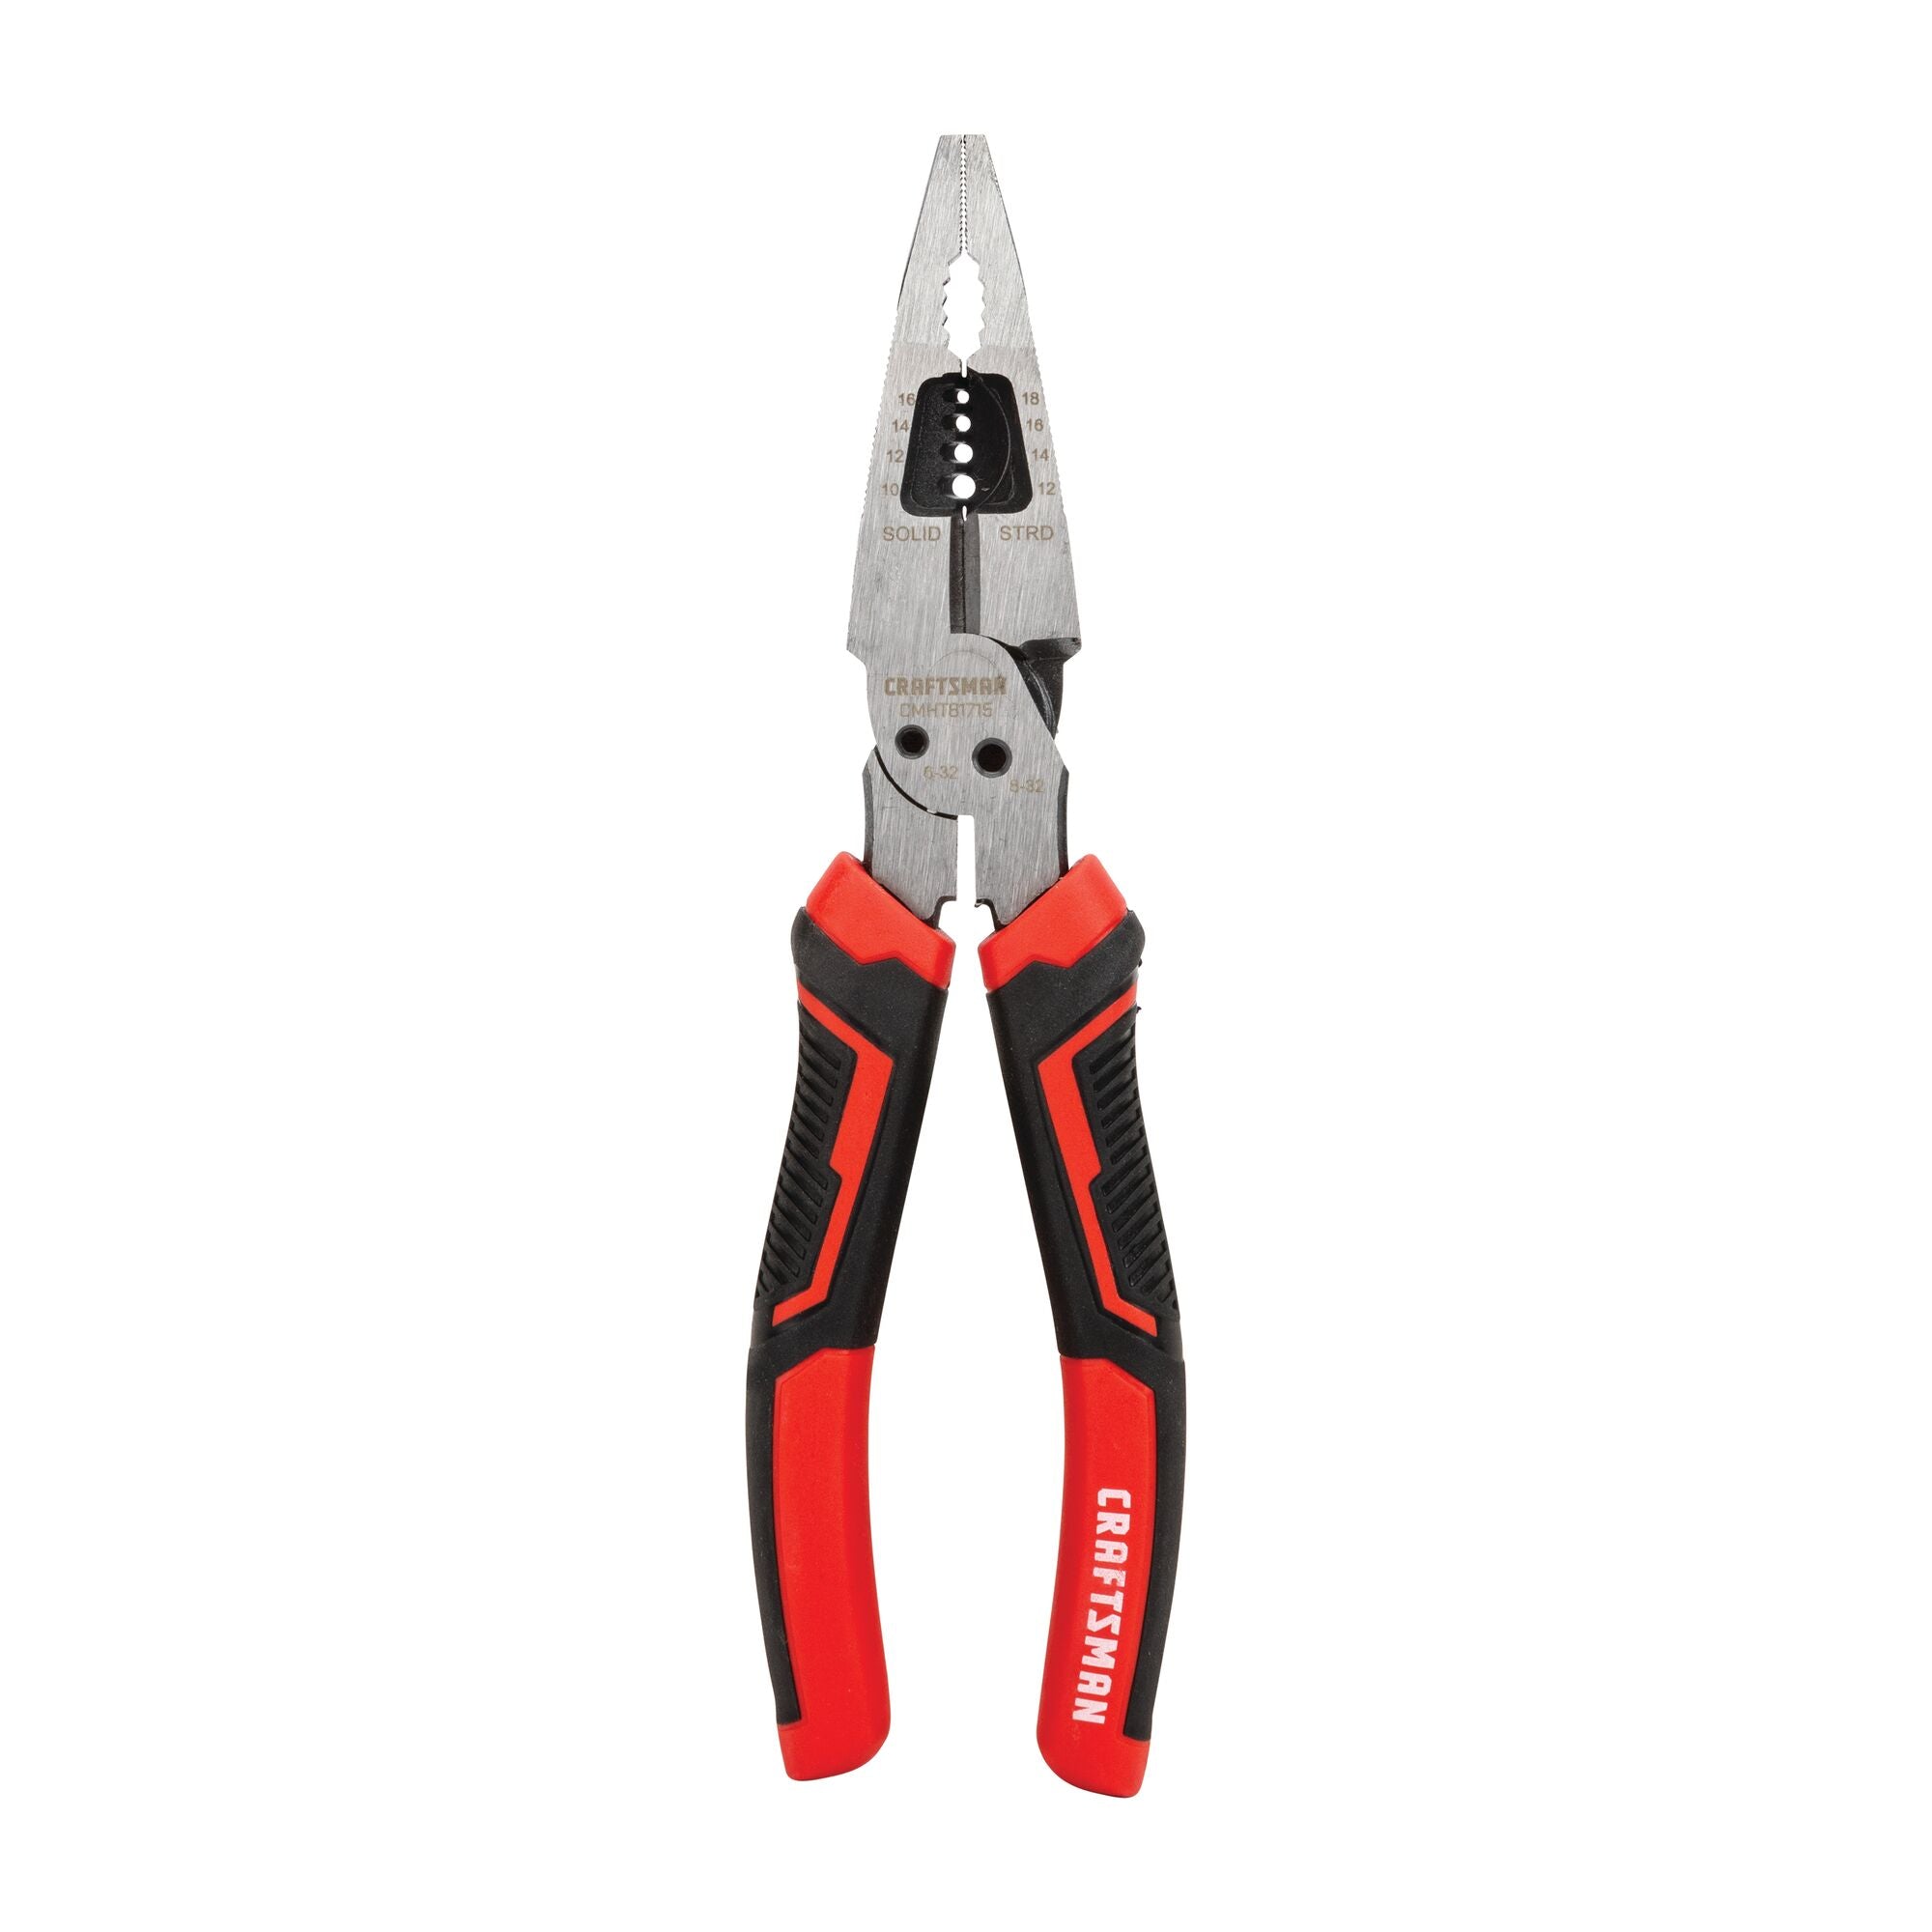 H B Smith 79151 9-in-1 Micro Pliers with Flash Light